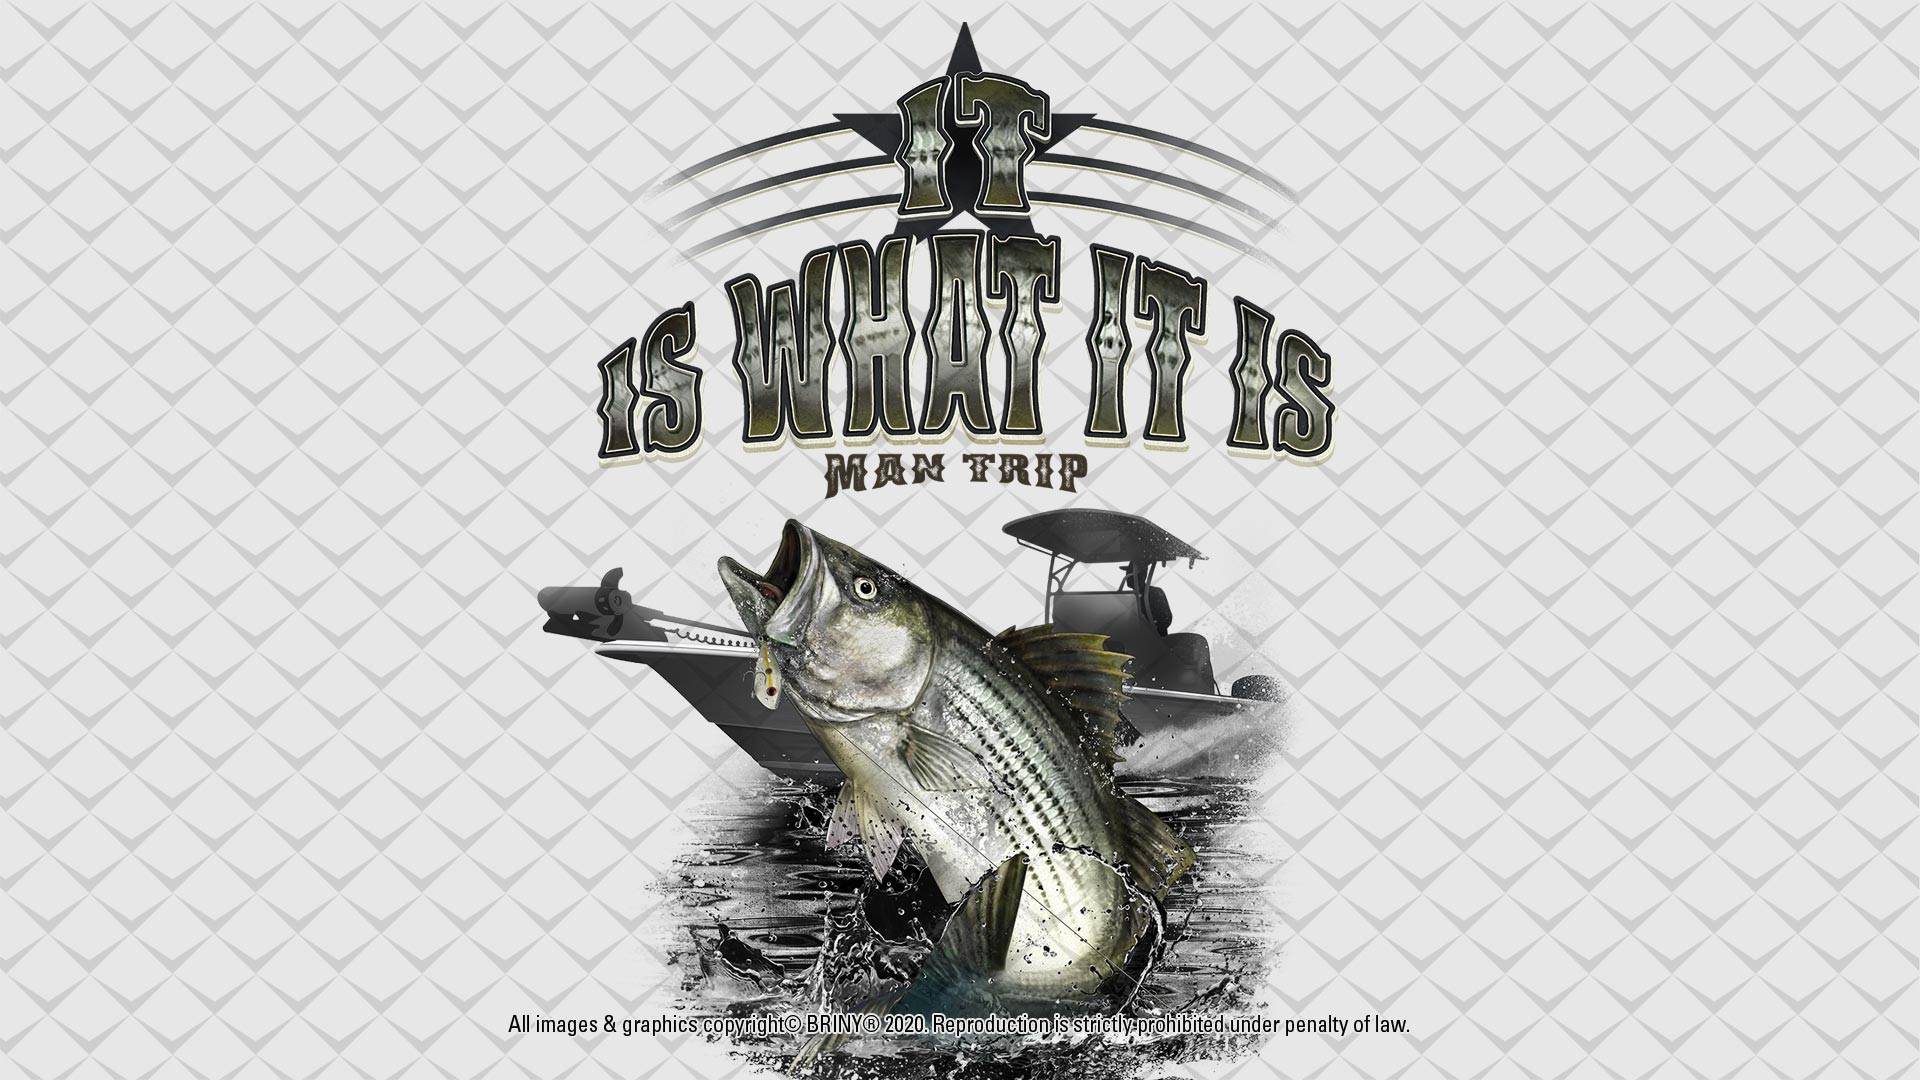 Briny-Striper Bass and lettering Graphic for custom fishing shirts